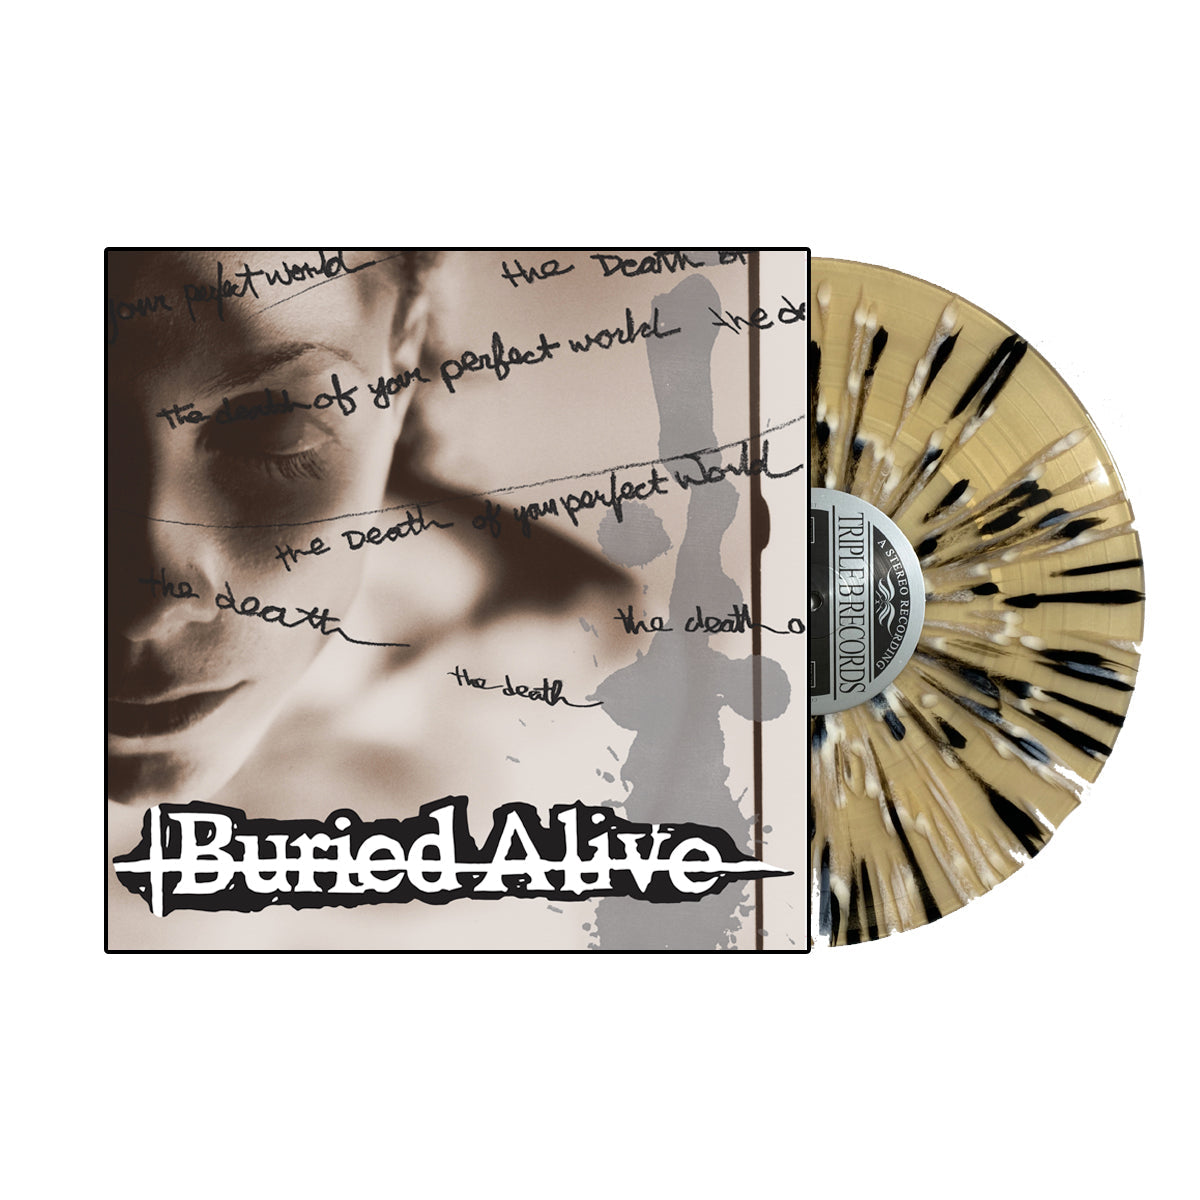 Buried Alive "The Death Of Your Perfect World" 12" Vinyl